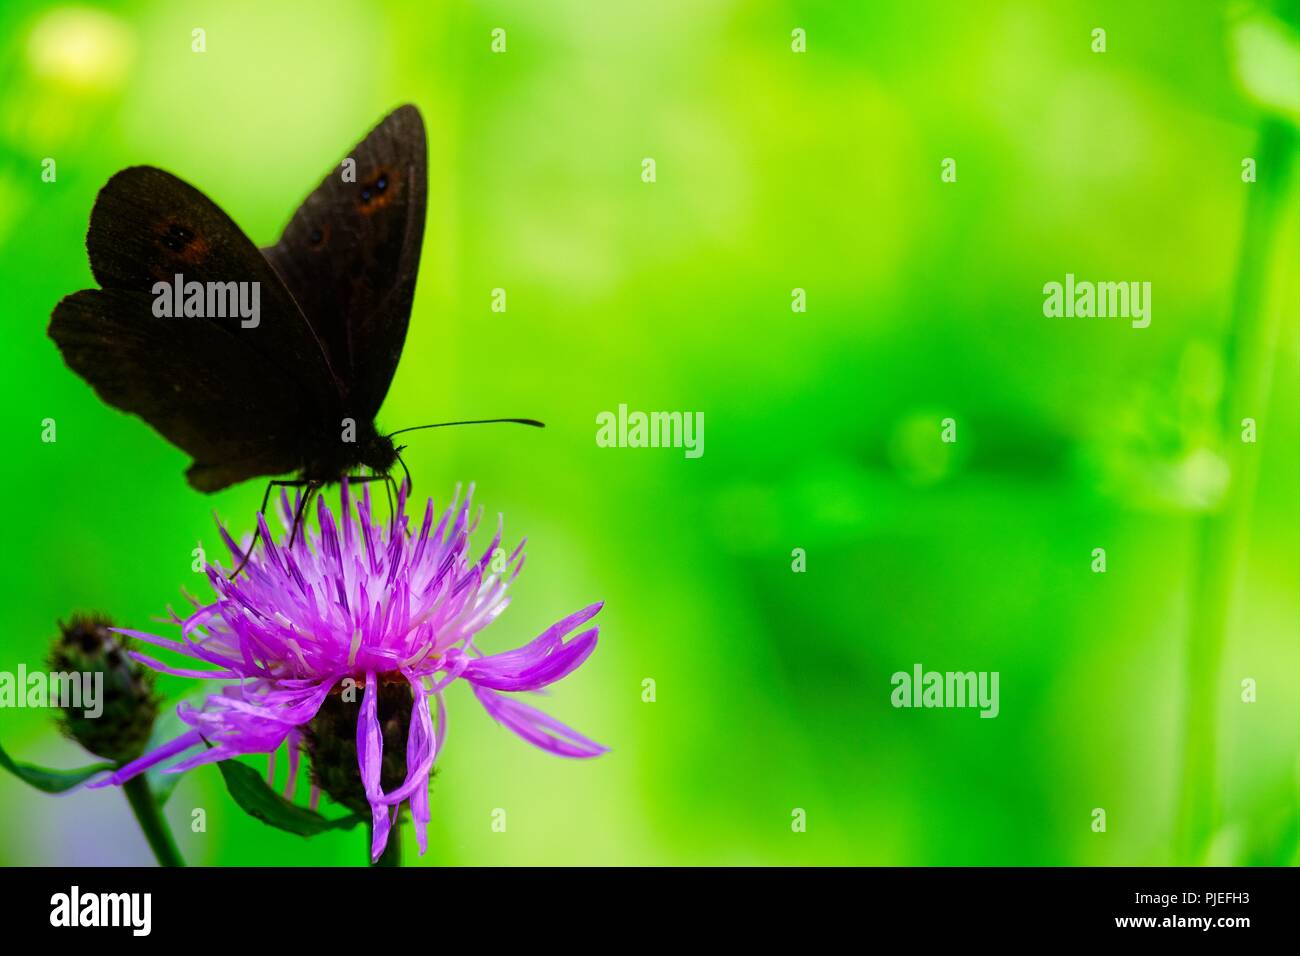 A dark brown butterfly on a purple flower against an idyllic green background Stock Photo